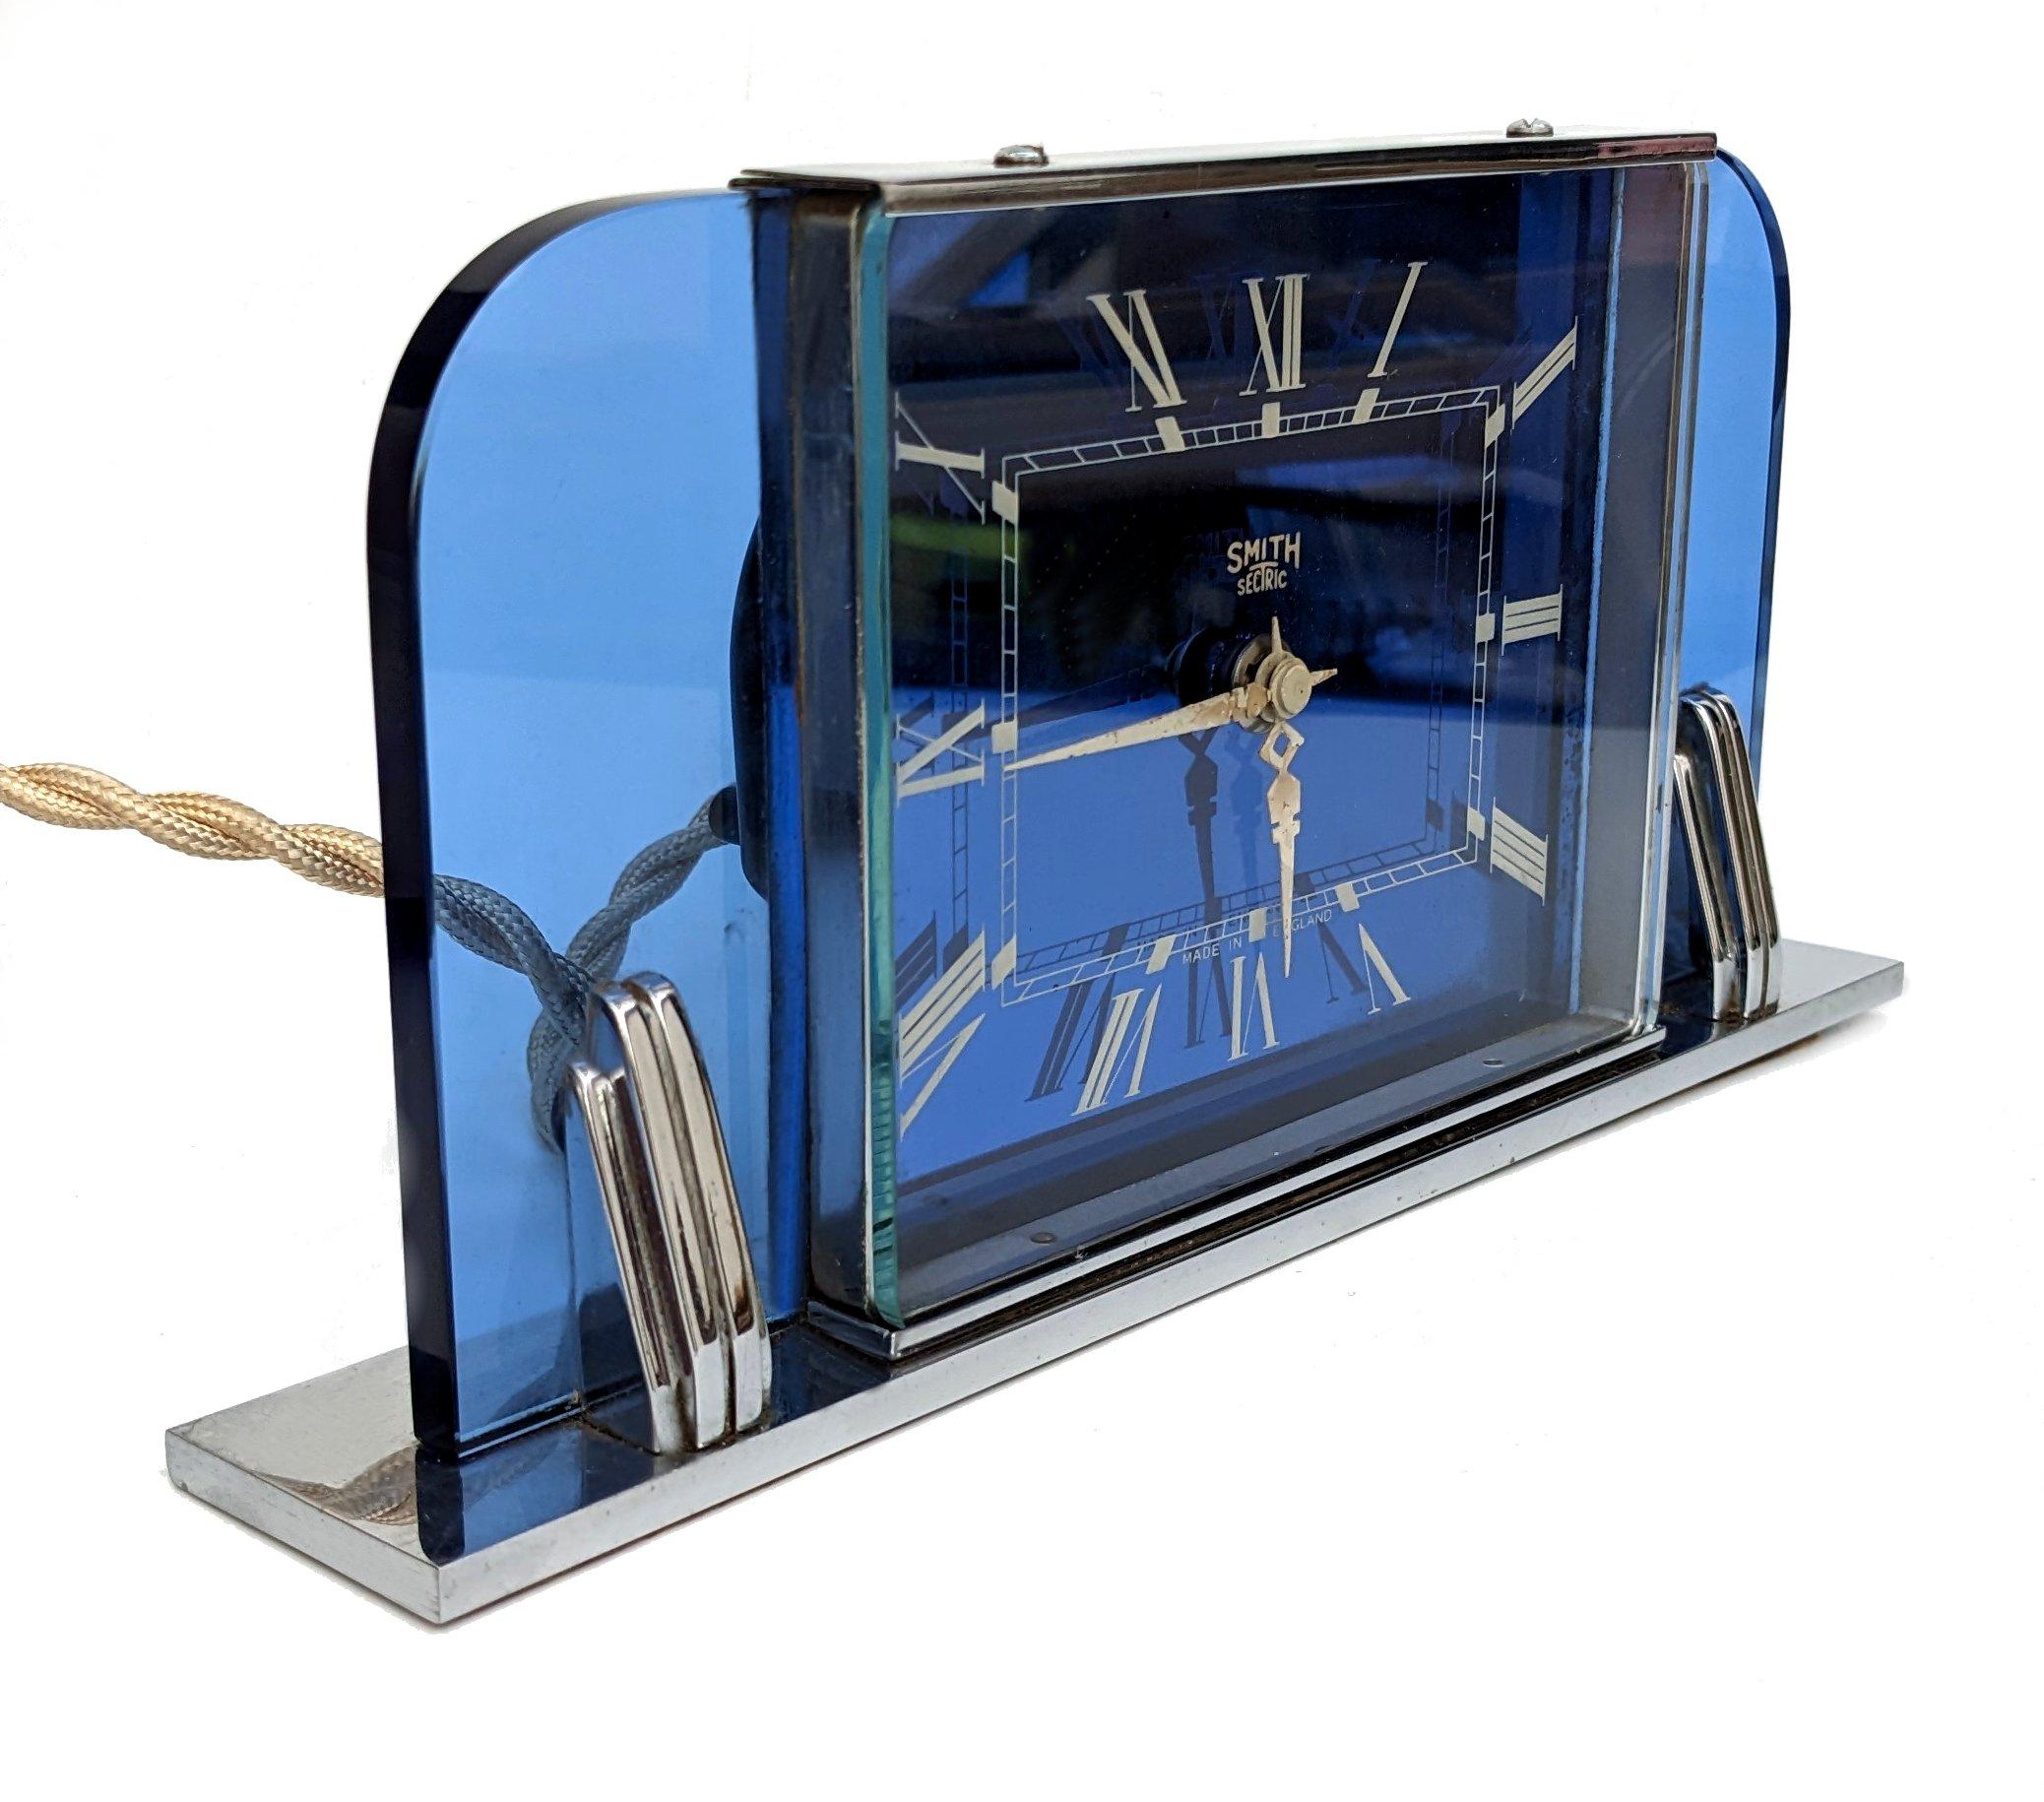 English Art Deco Modernist Blue Glass Electric Clock By Smiths Clockmakers, c1930 For Sale